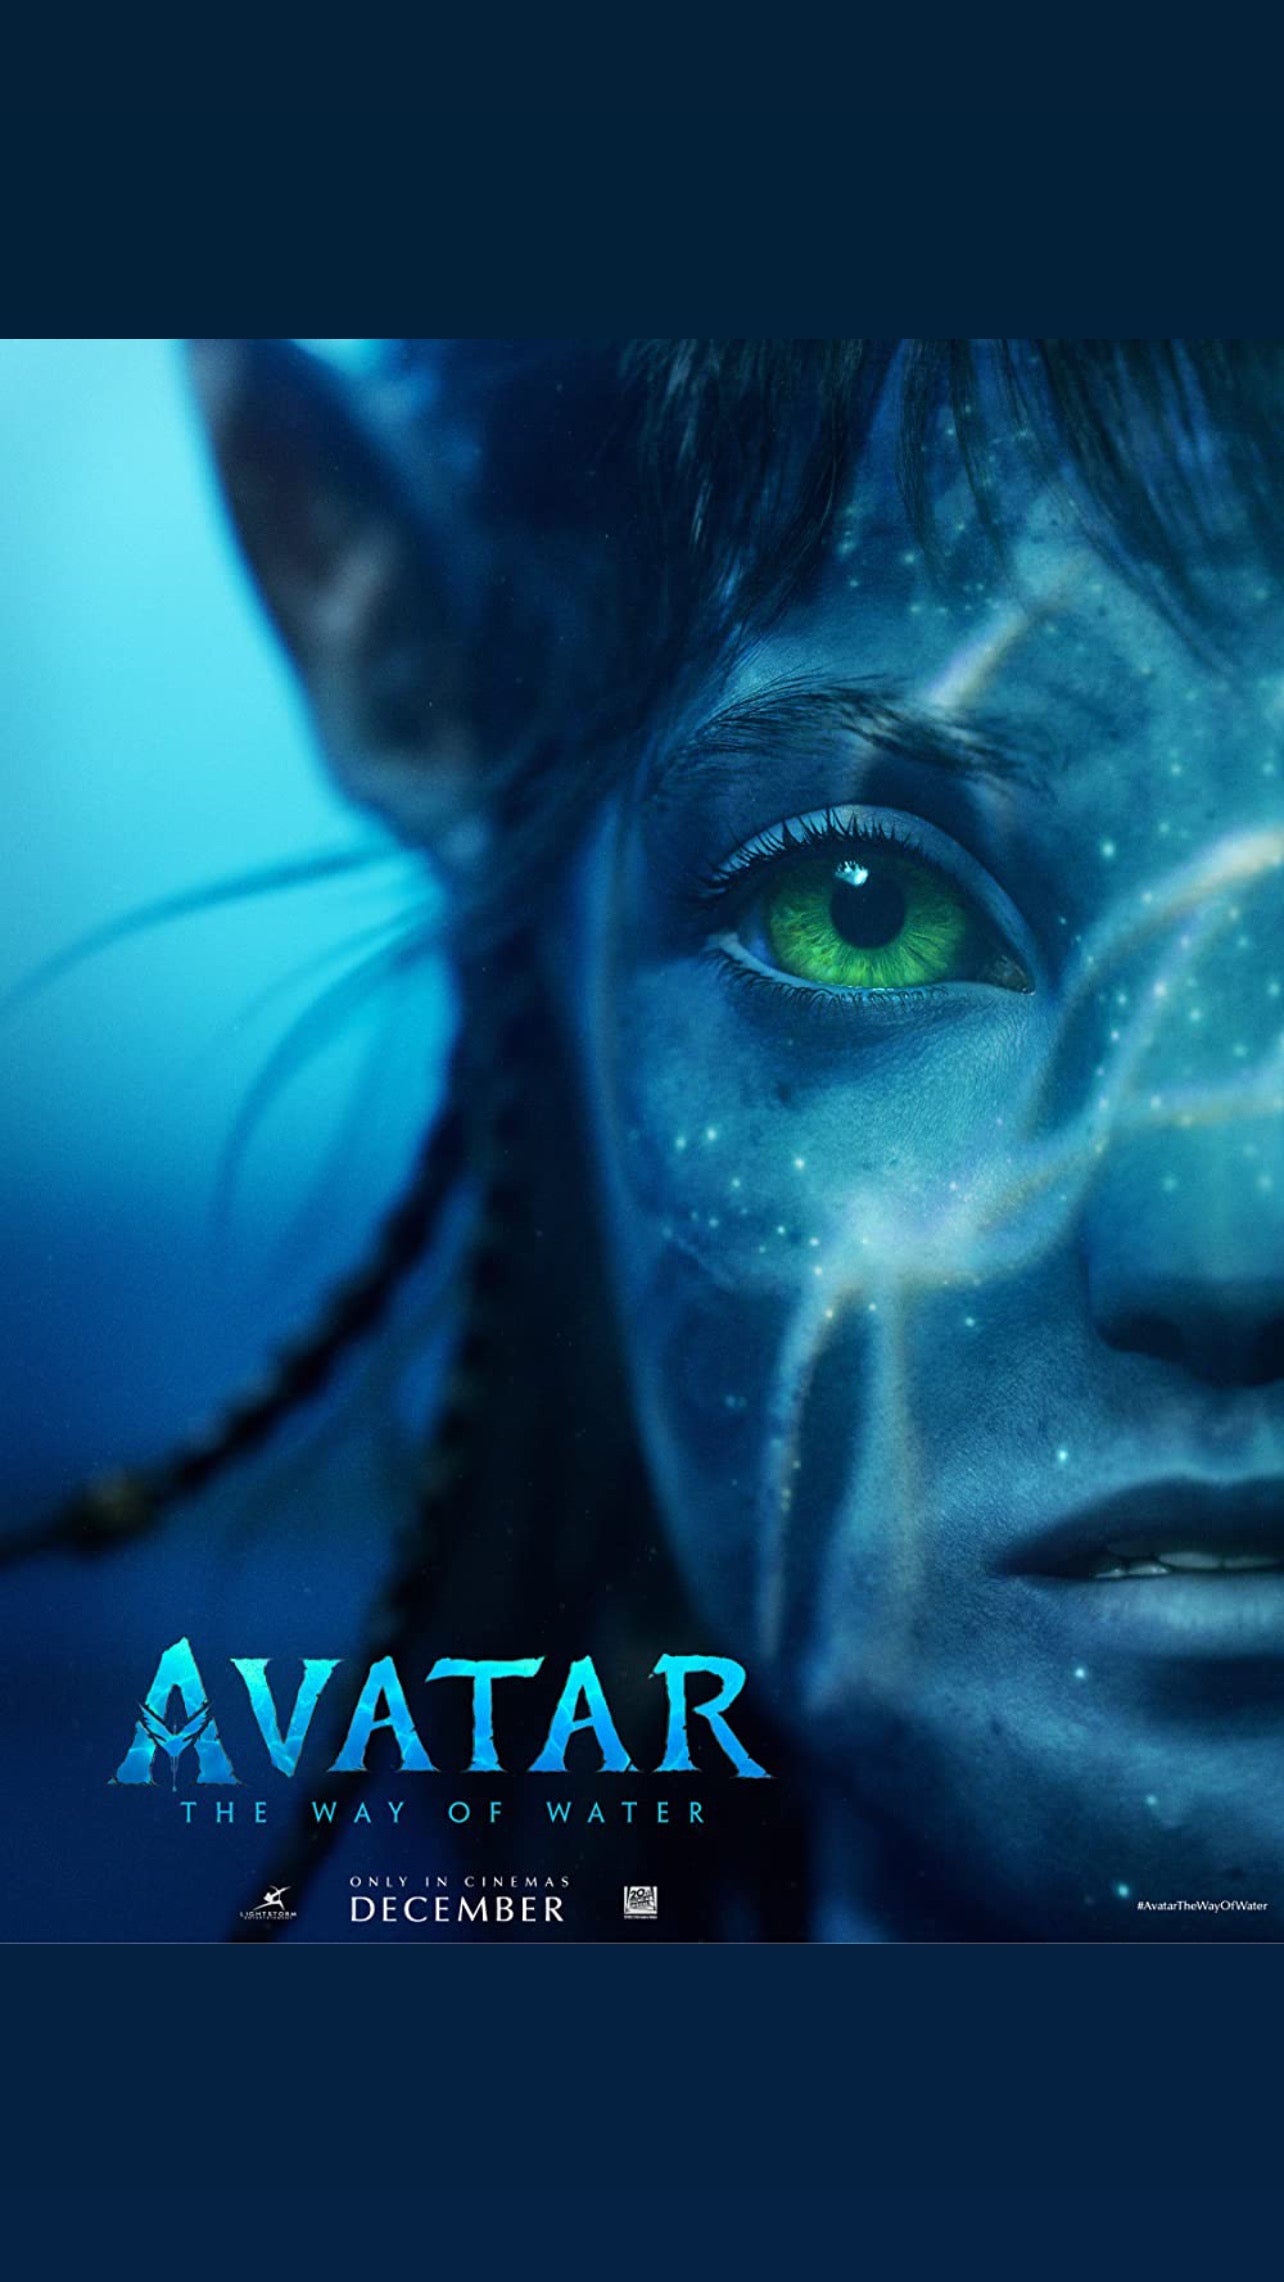 Avatar 2 is Coming: The Rewarding Return of a Revolutionary Franchise